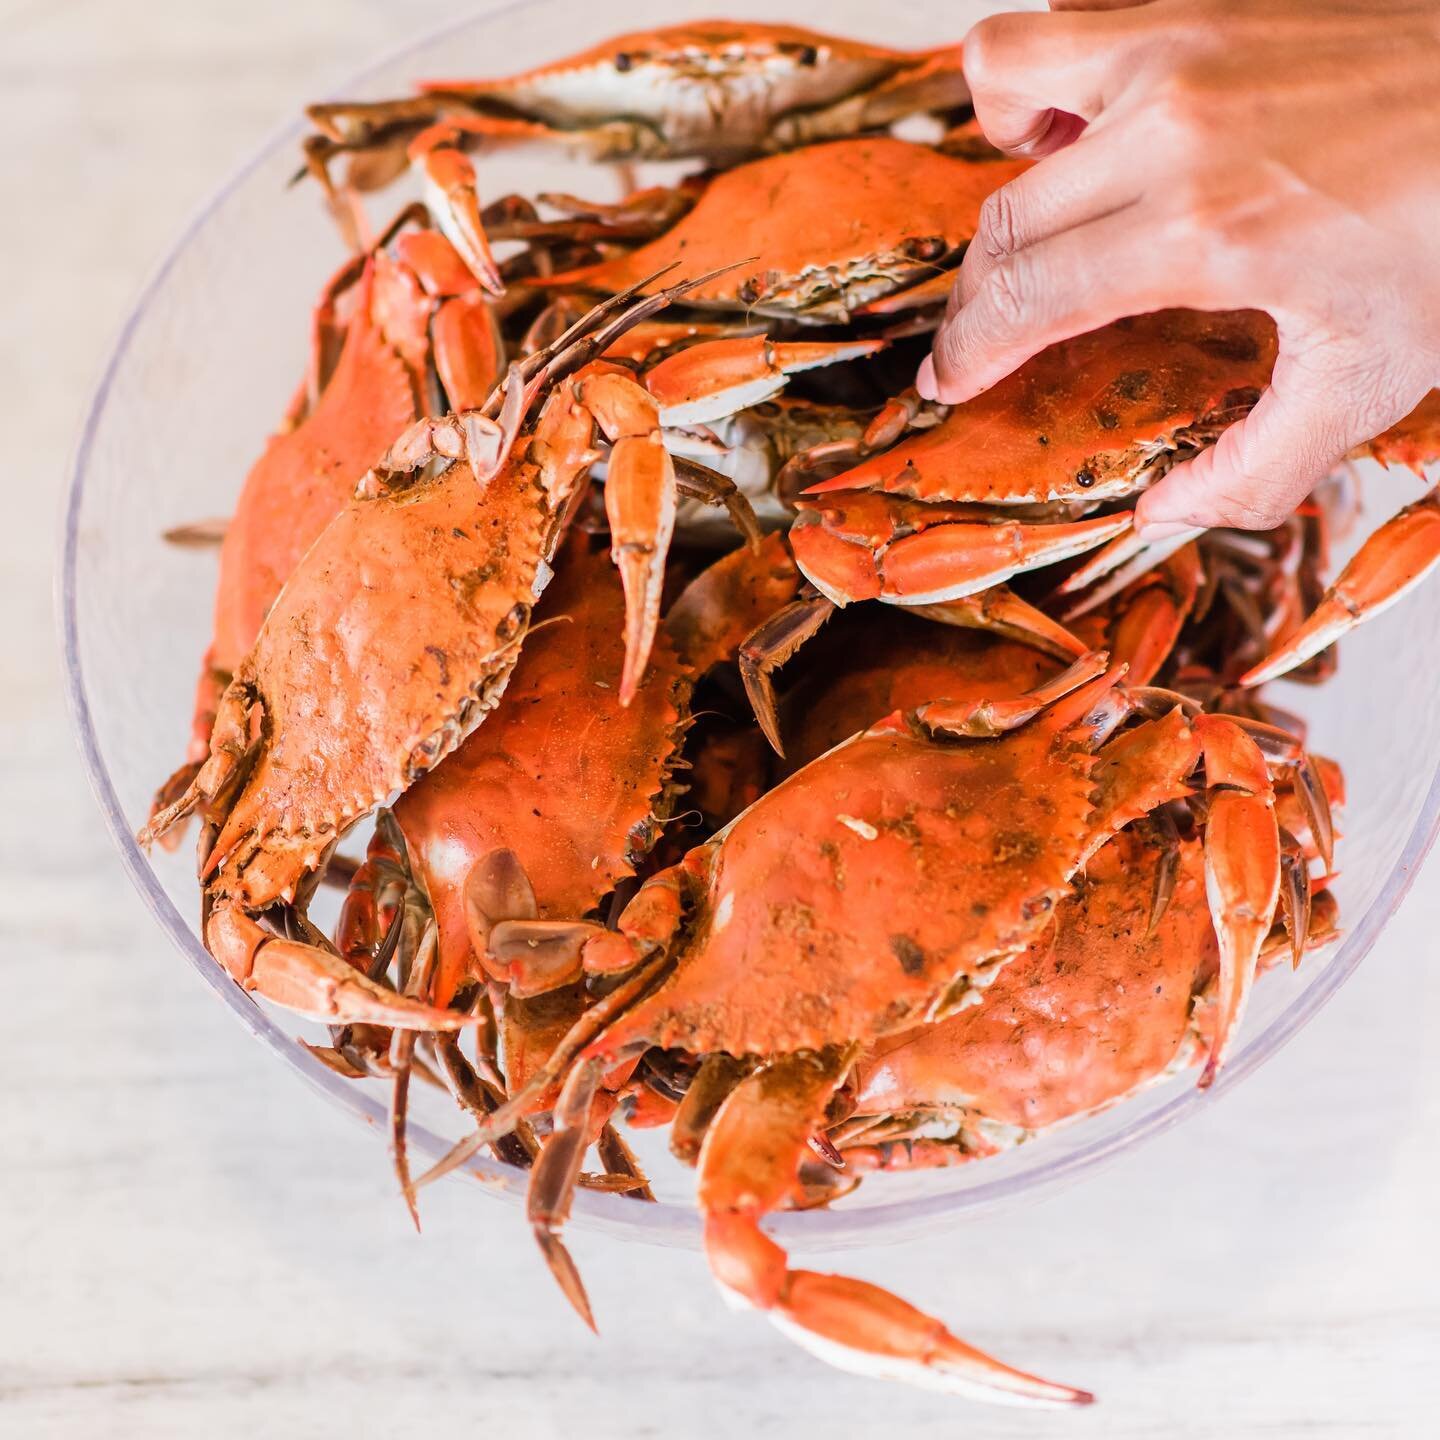 ✨HERE&rsquo;S YOUR WEEKLY CRAB REMINDER✨

NC blue crabs will be available for ordering in 1 hour‼️ 

Live &amp; steamed blue crabs go fast so we suggest showing up early and waiting for the truck to arrive from the coast🌊🚚

Give our fresh market a 